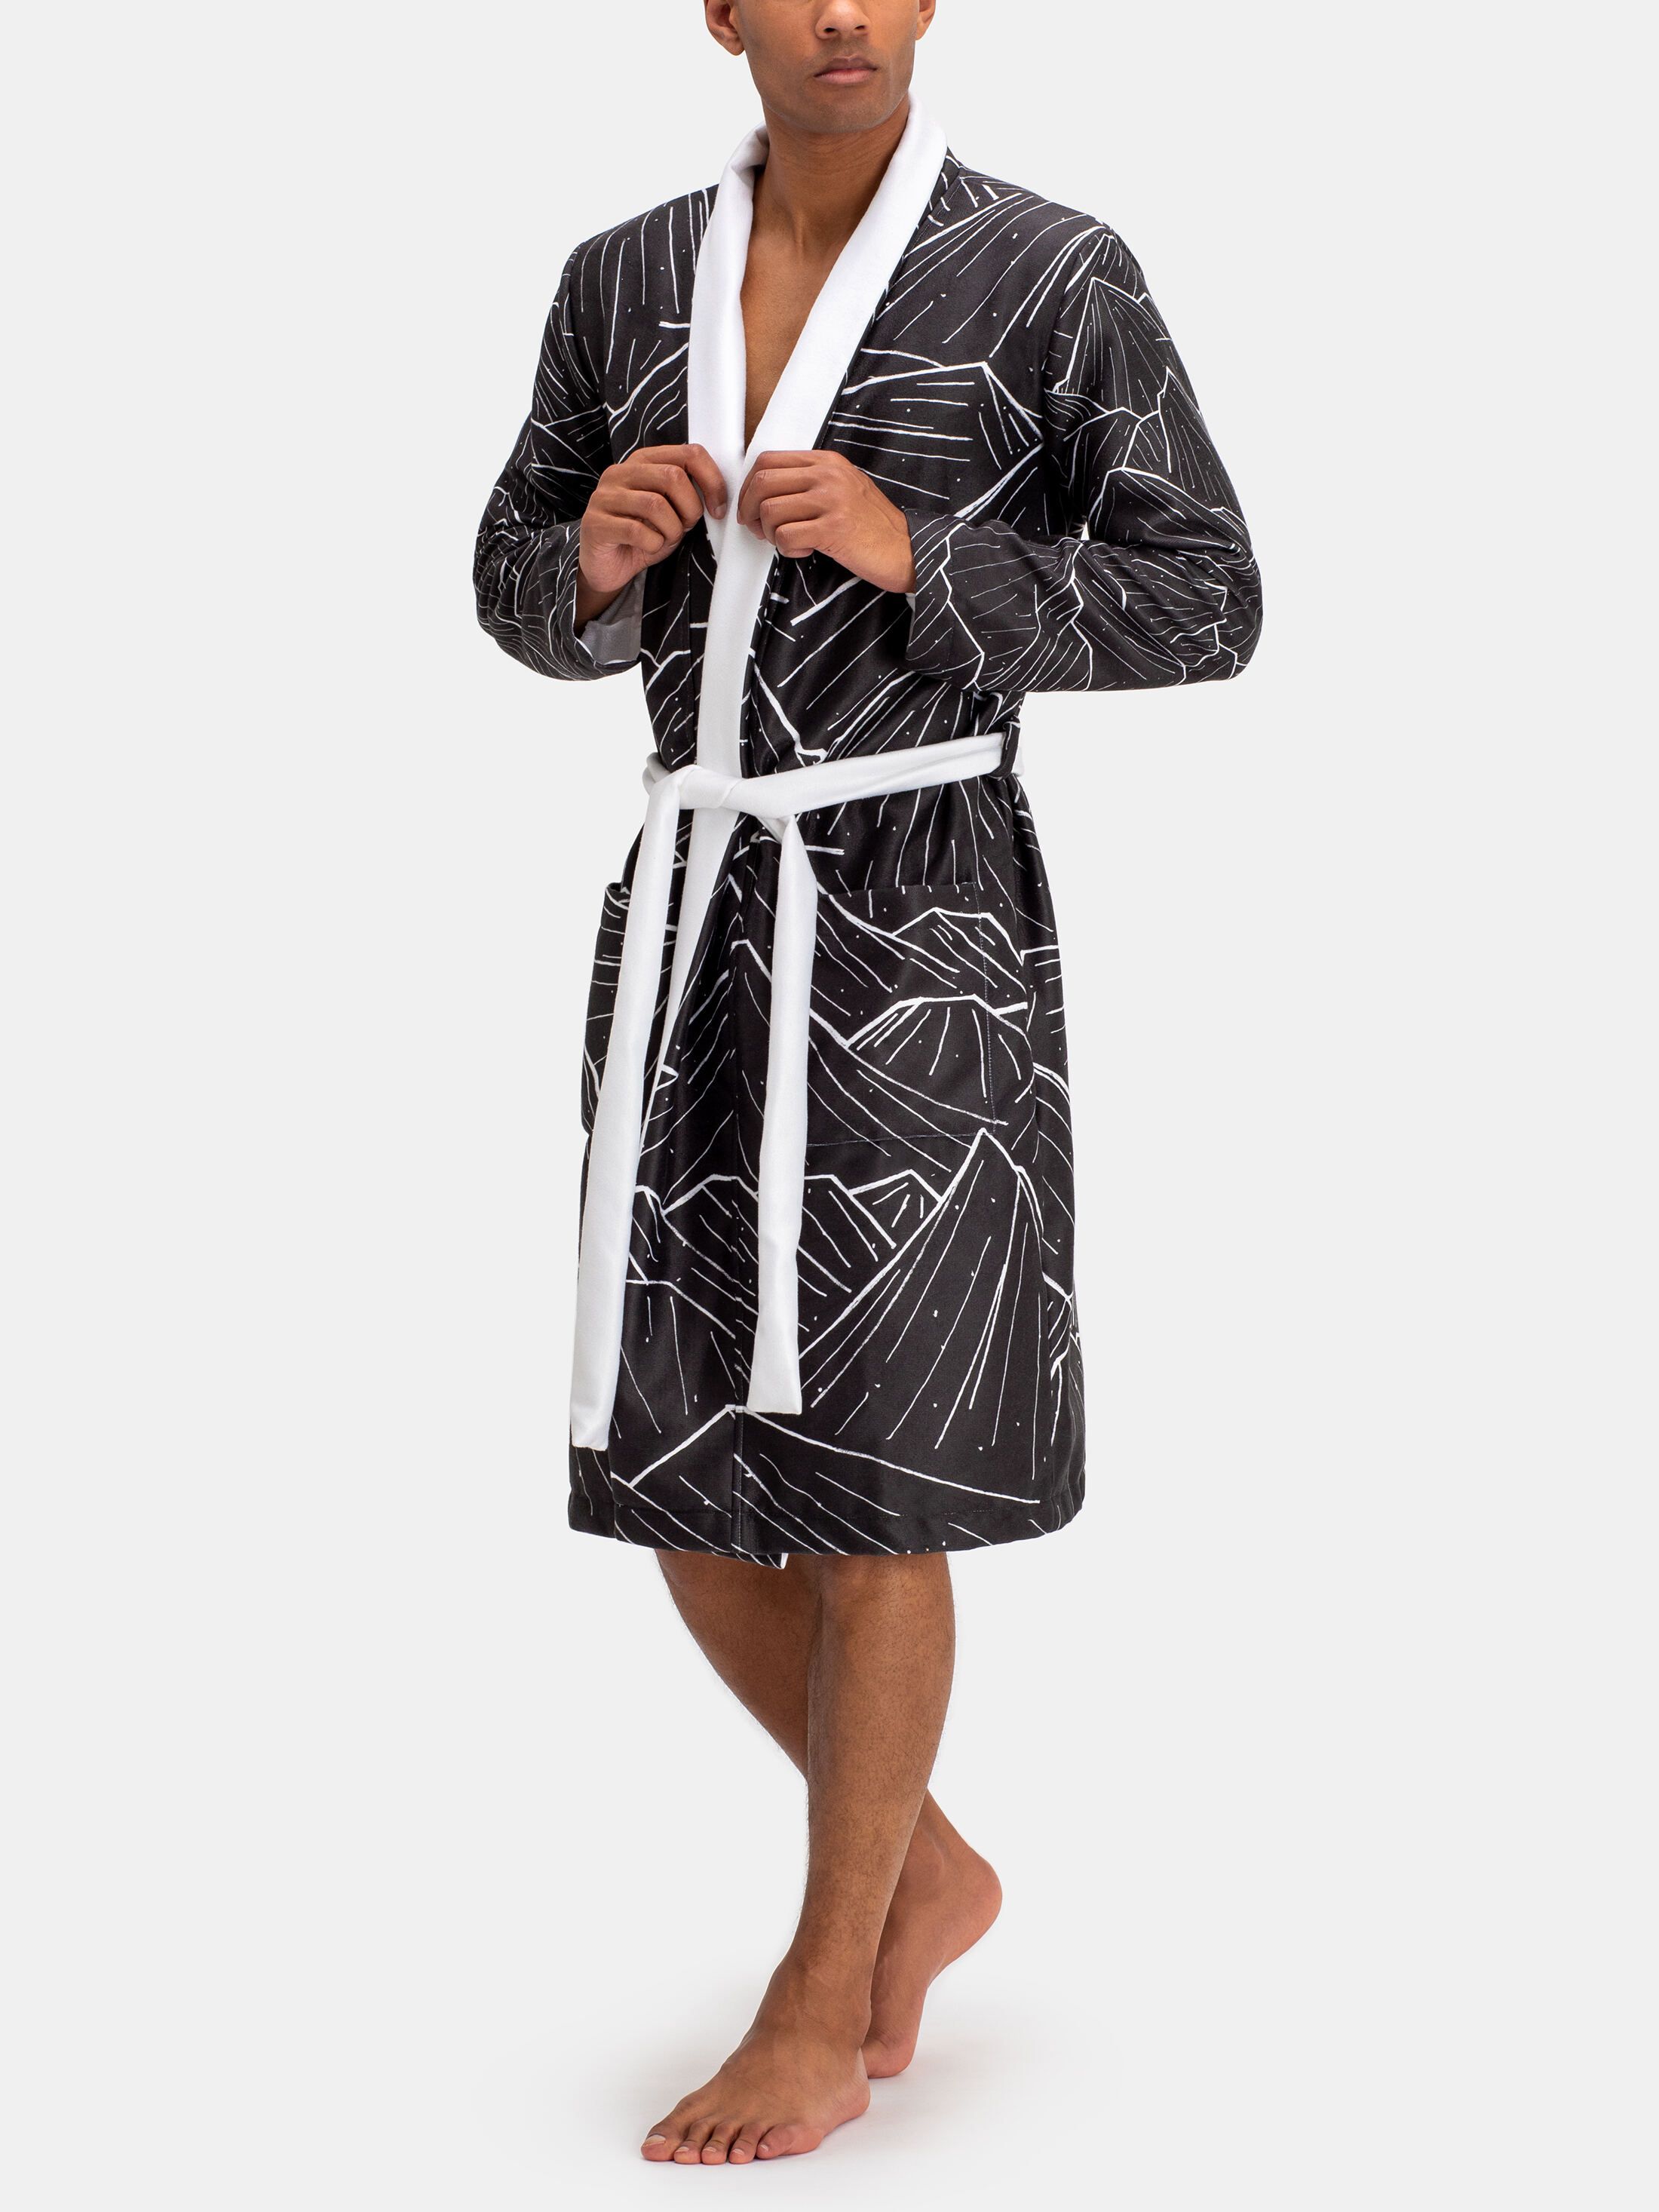 personalized bathrobes with custom designs or logos